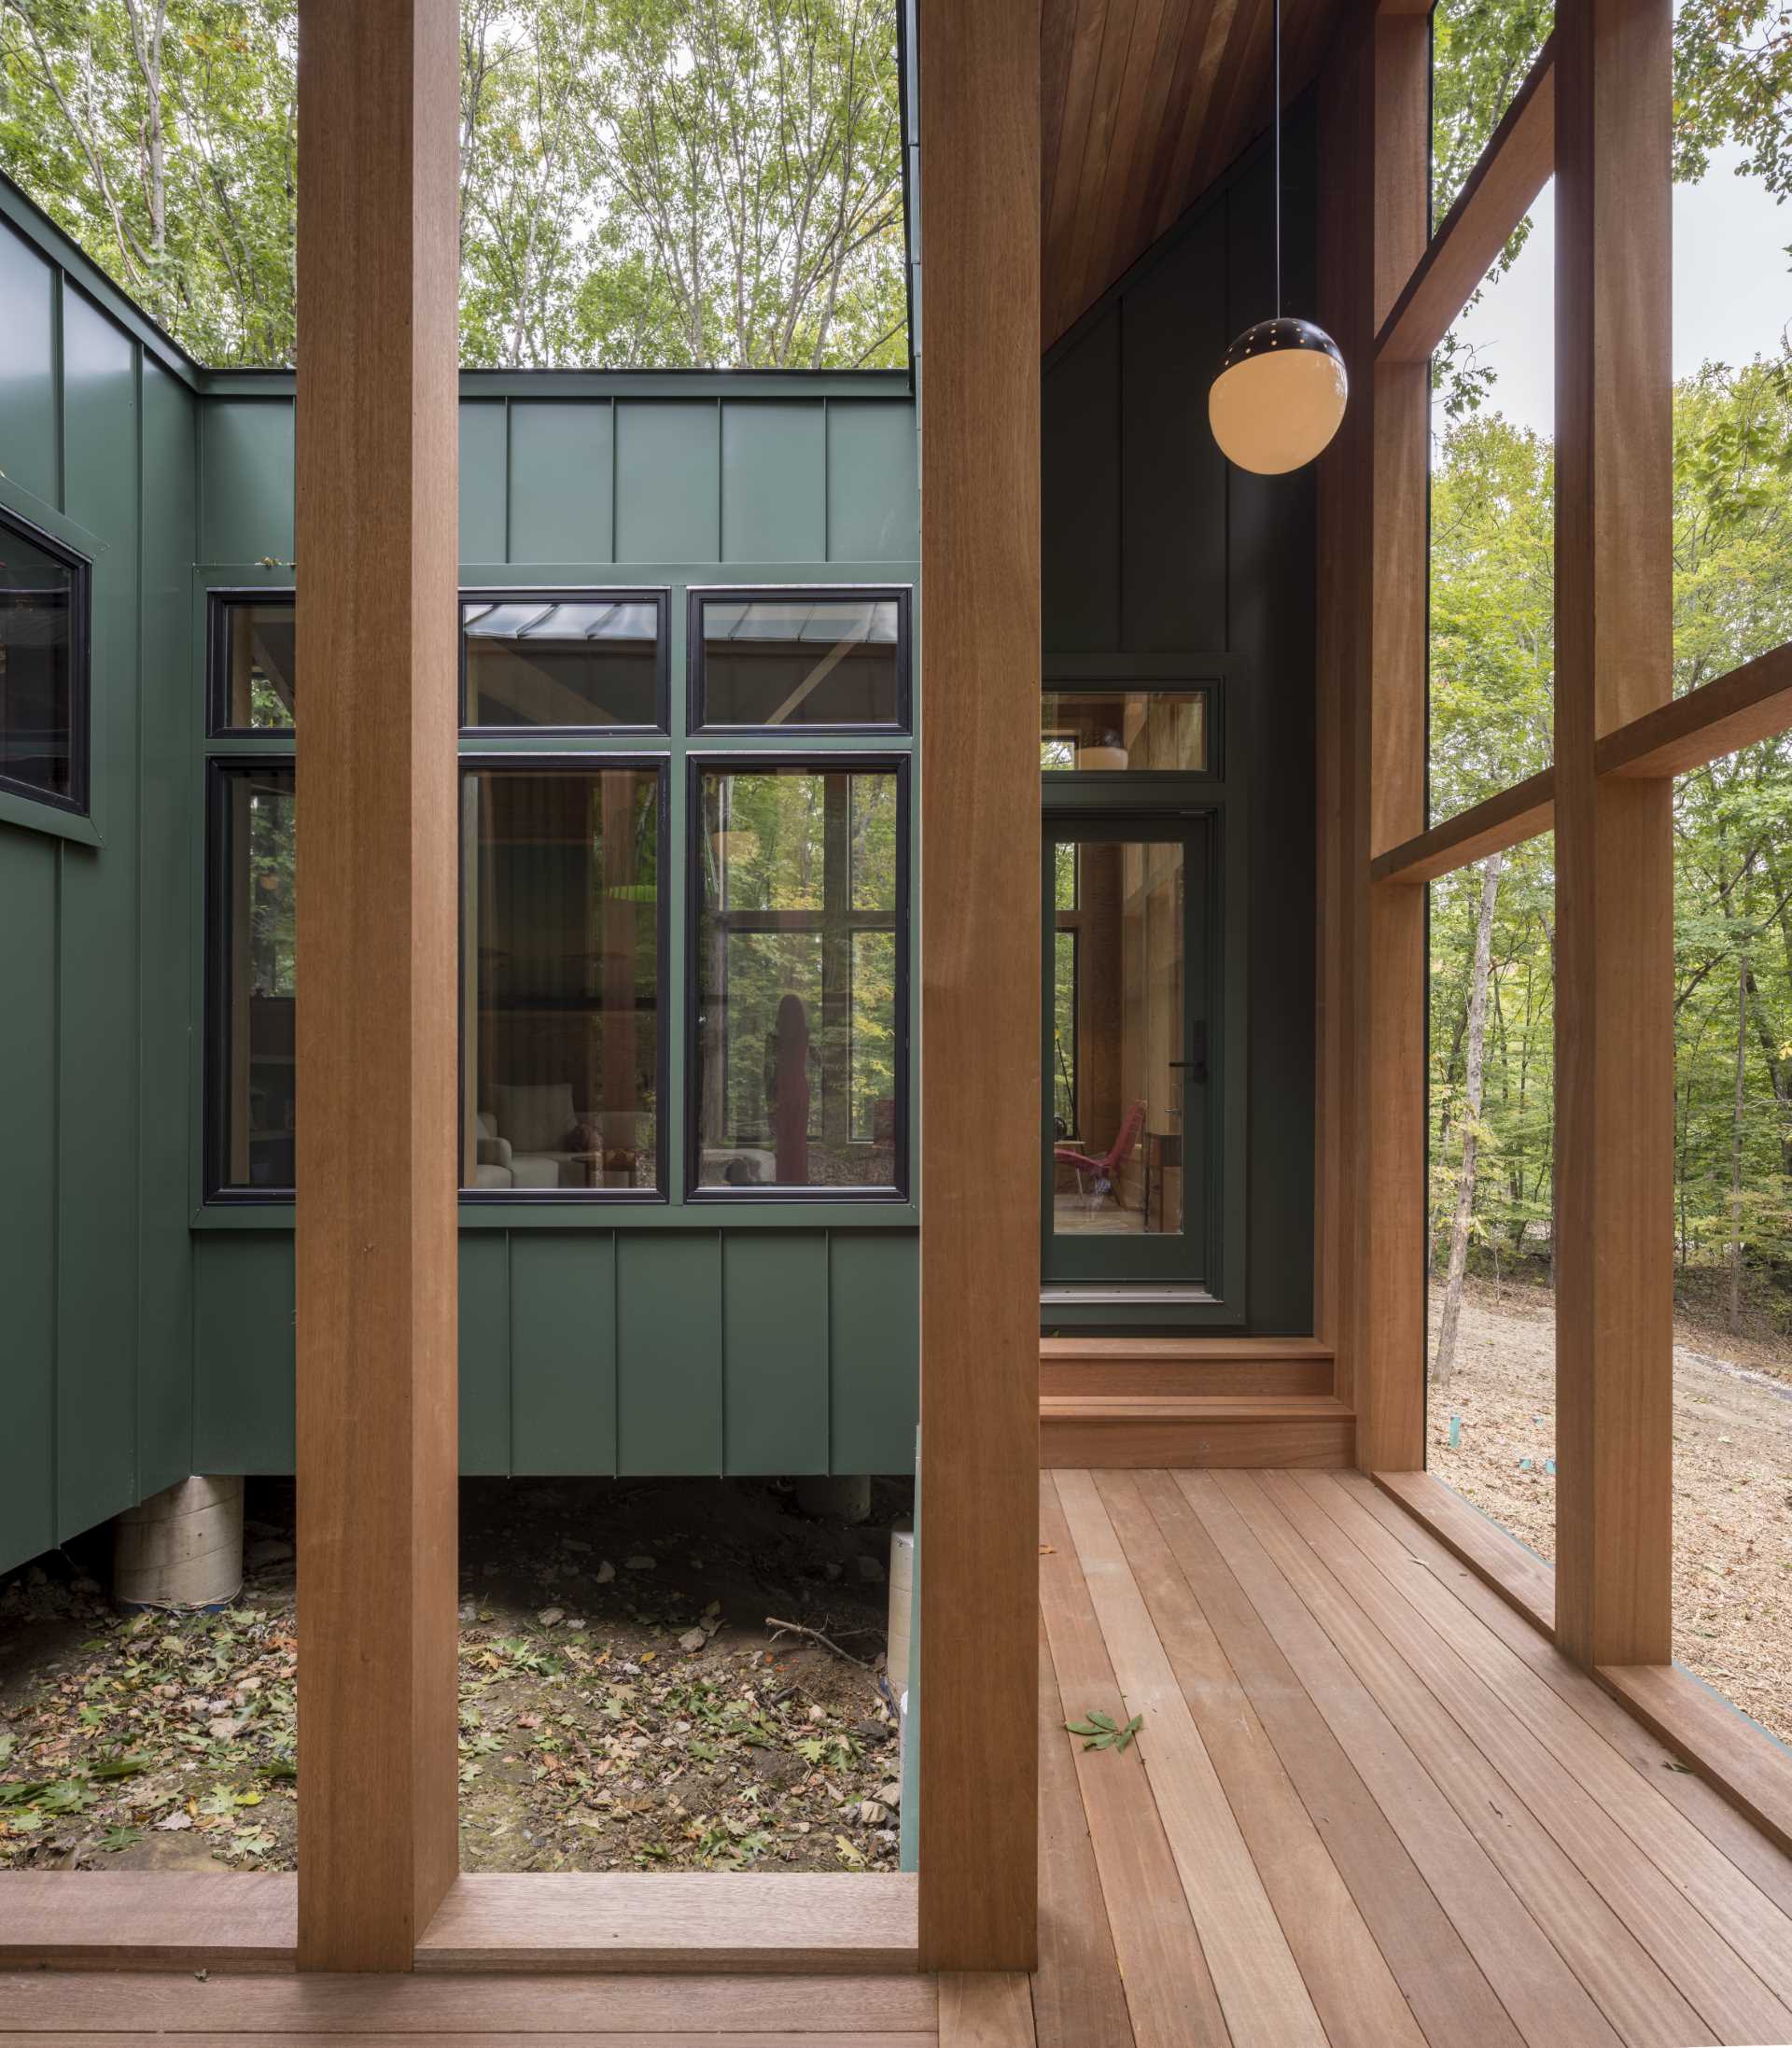 A modern cabin with a covered porch and central open area.